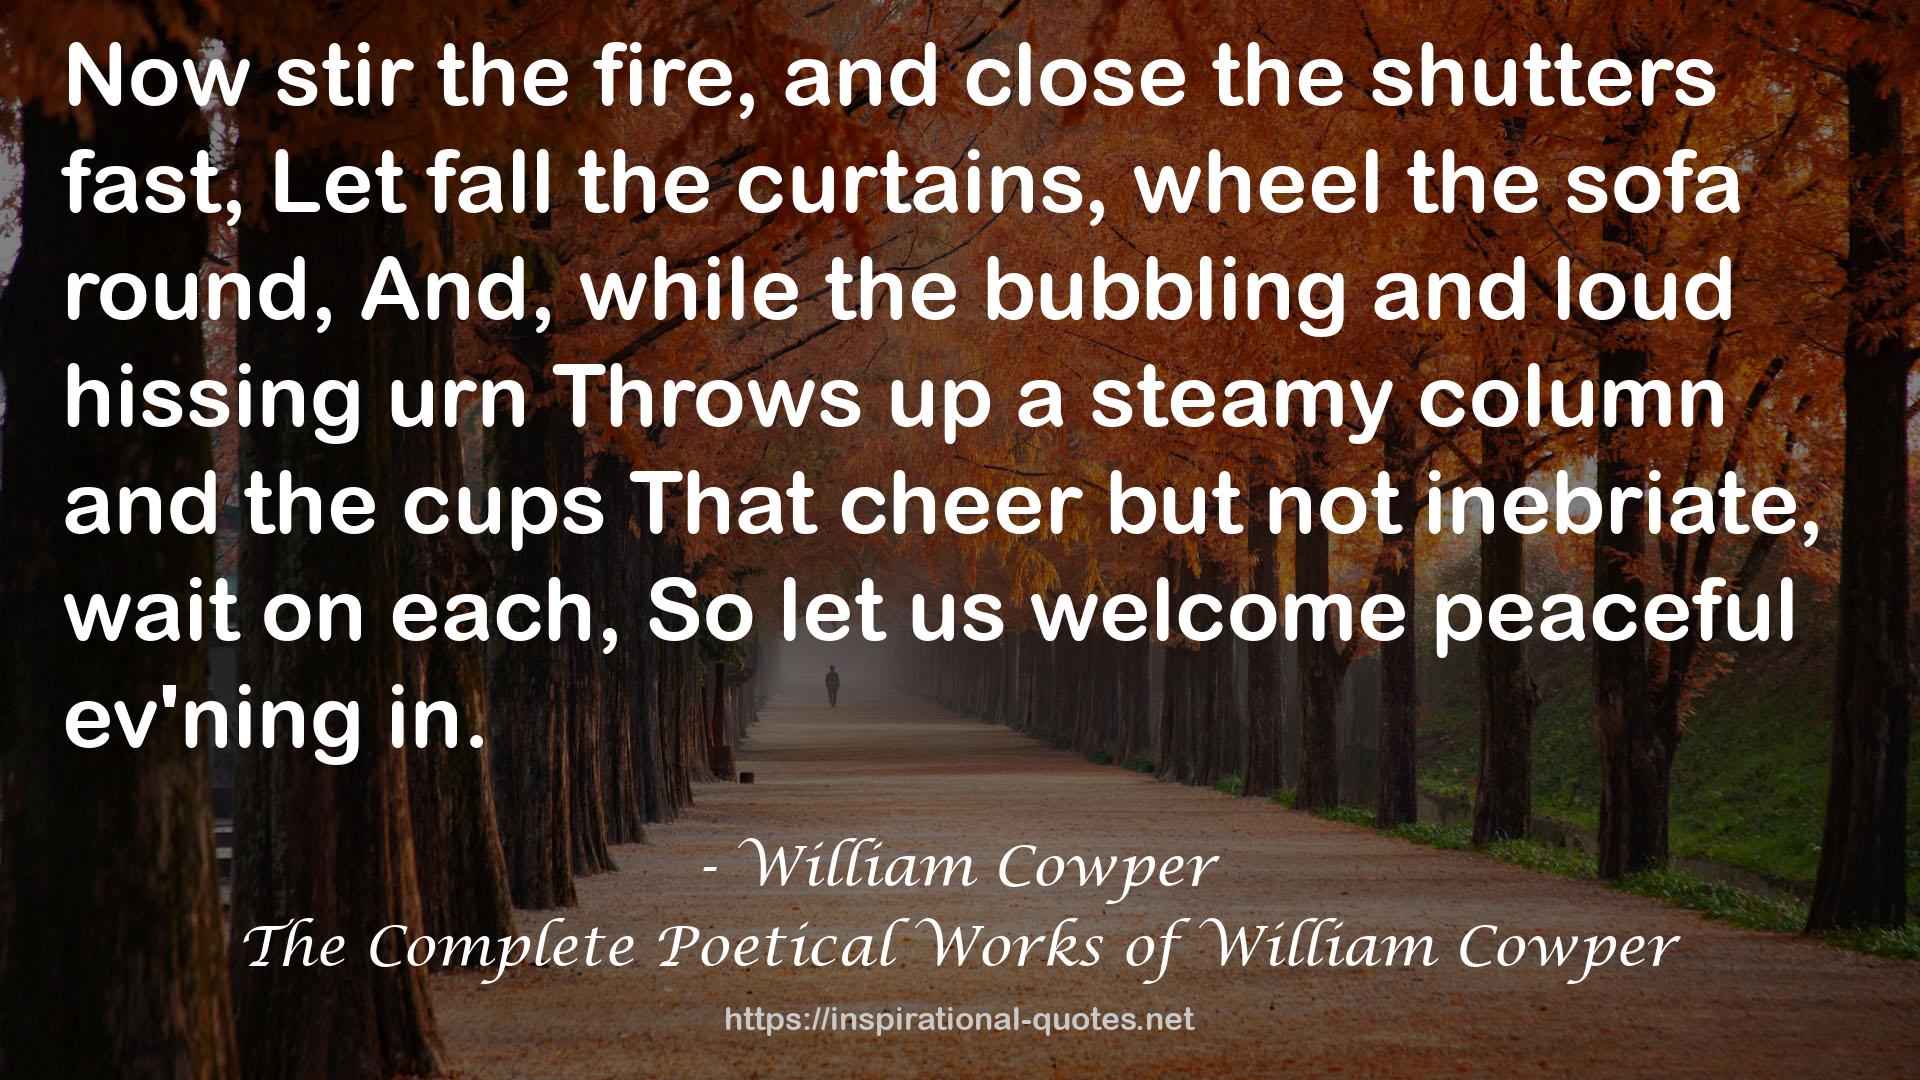 The Complete Poetical Works of William Cowper QUOTES